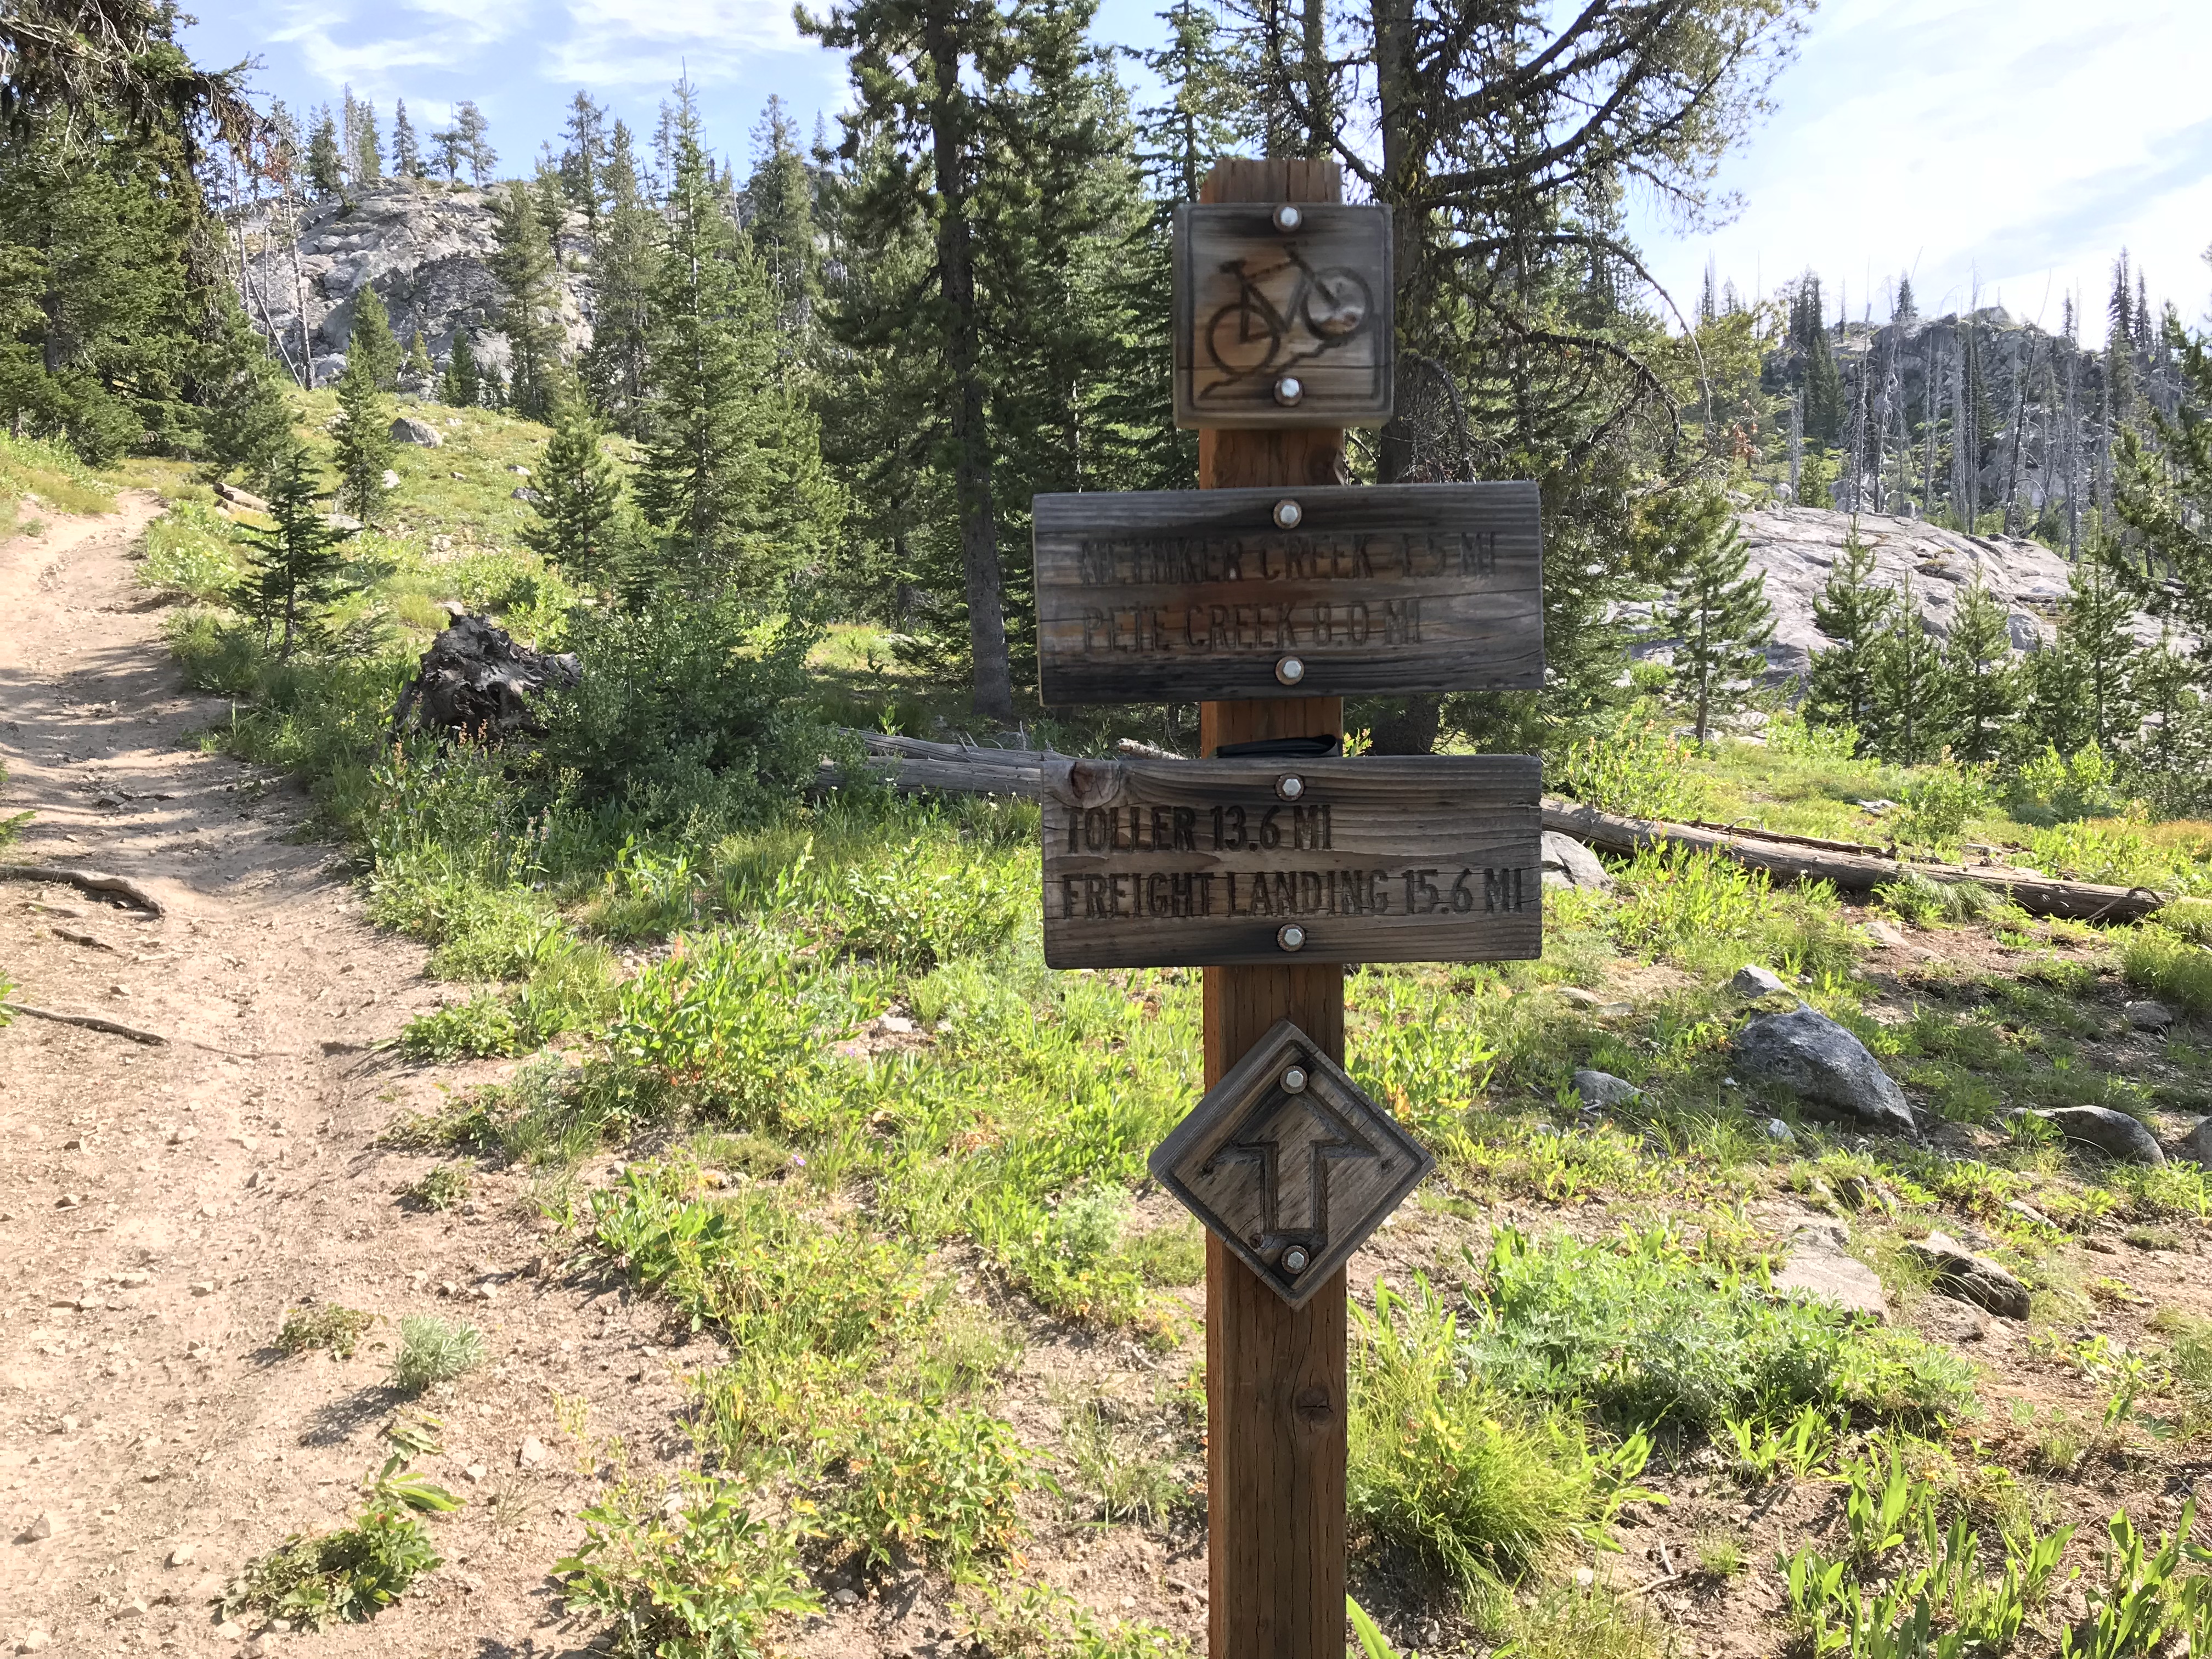 The beginning of the trail is marked as a mountain bike route.